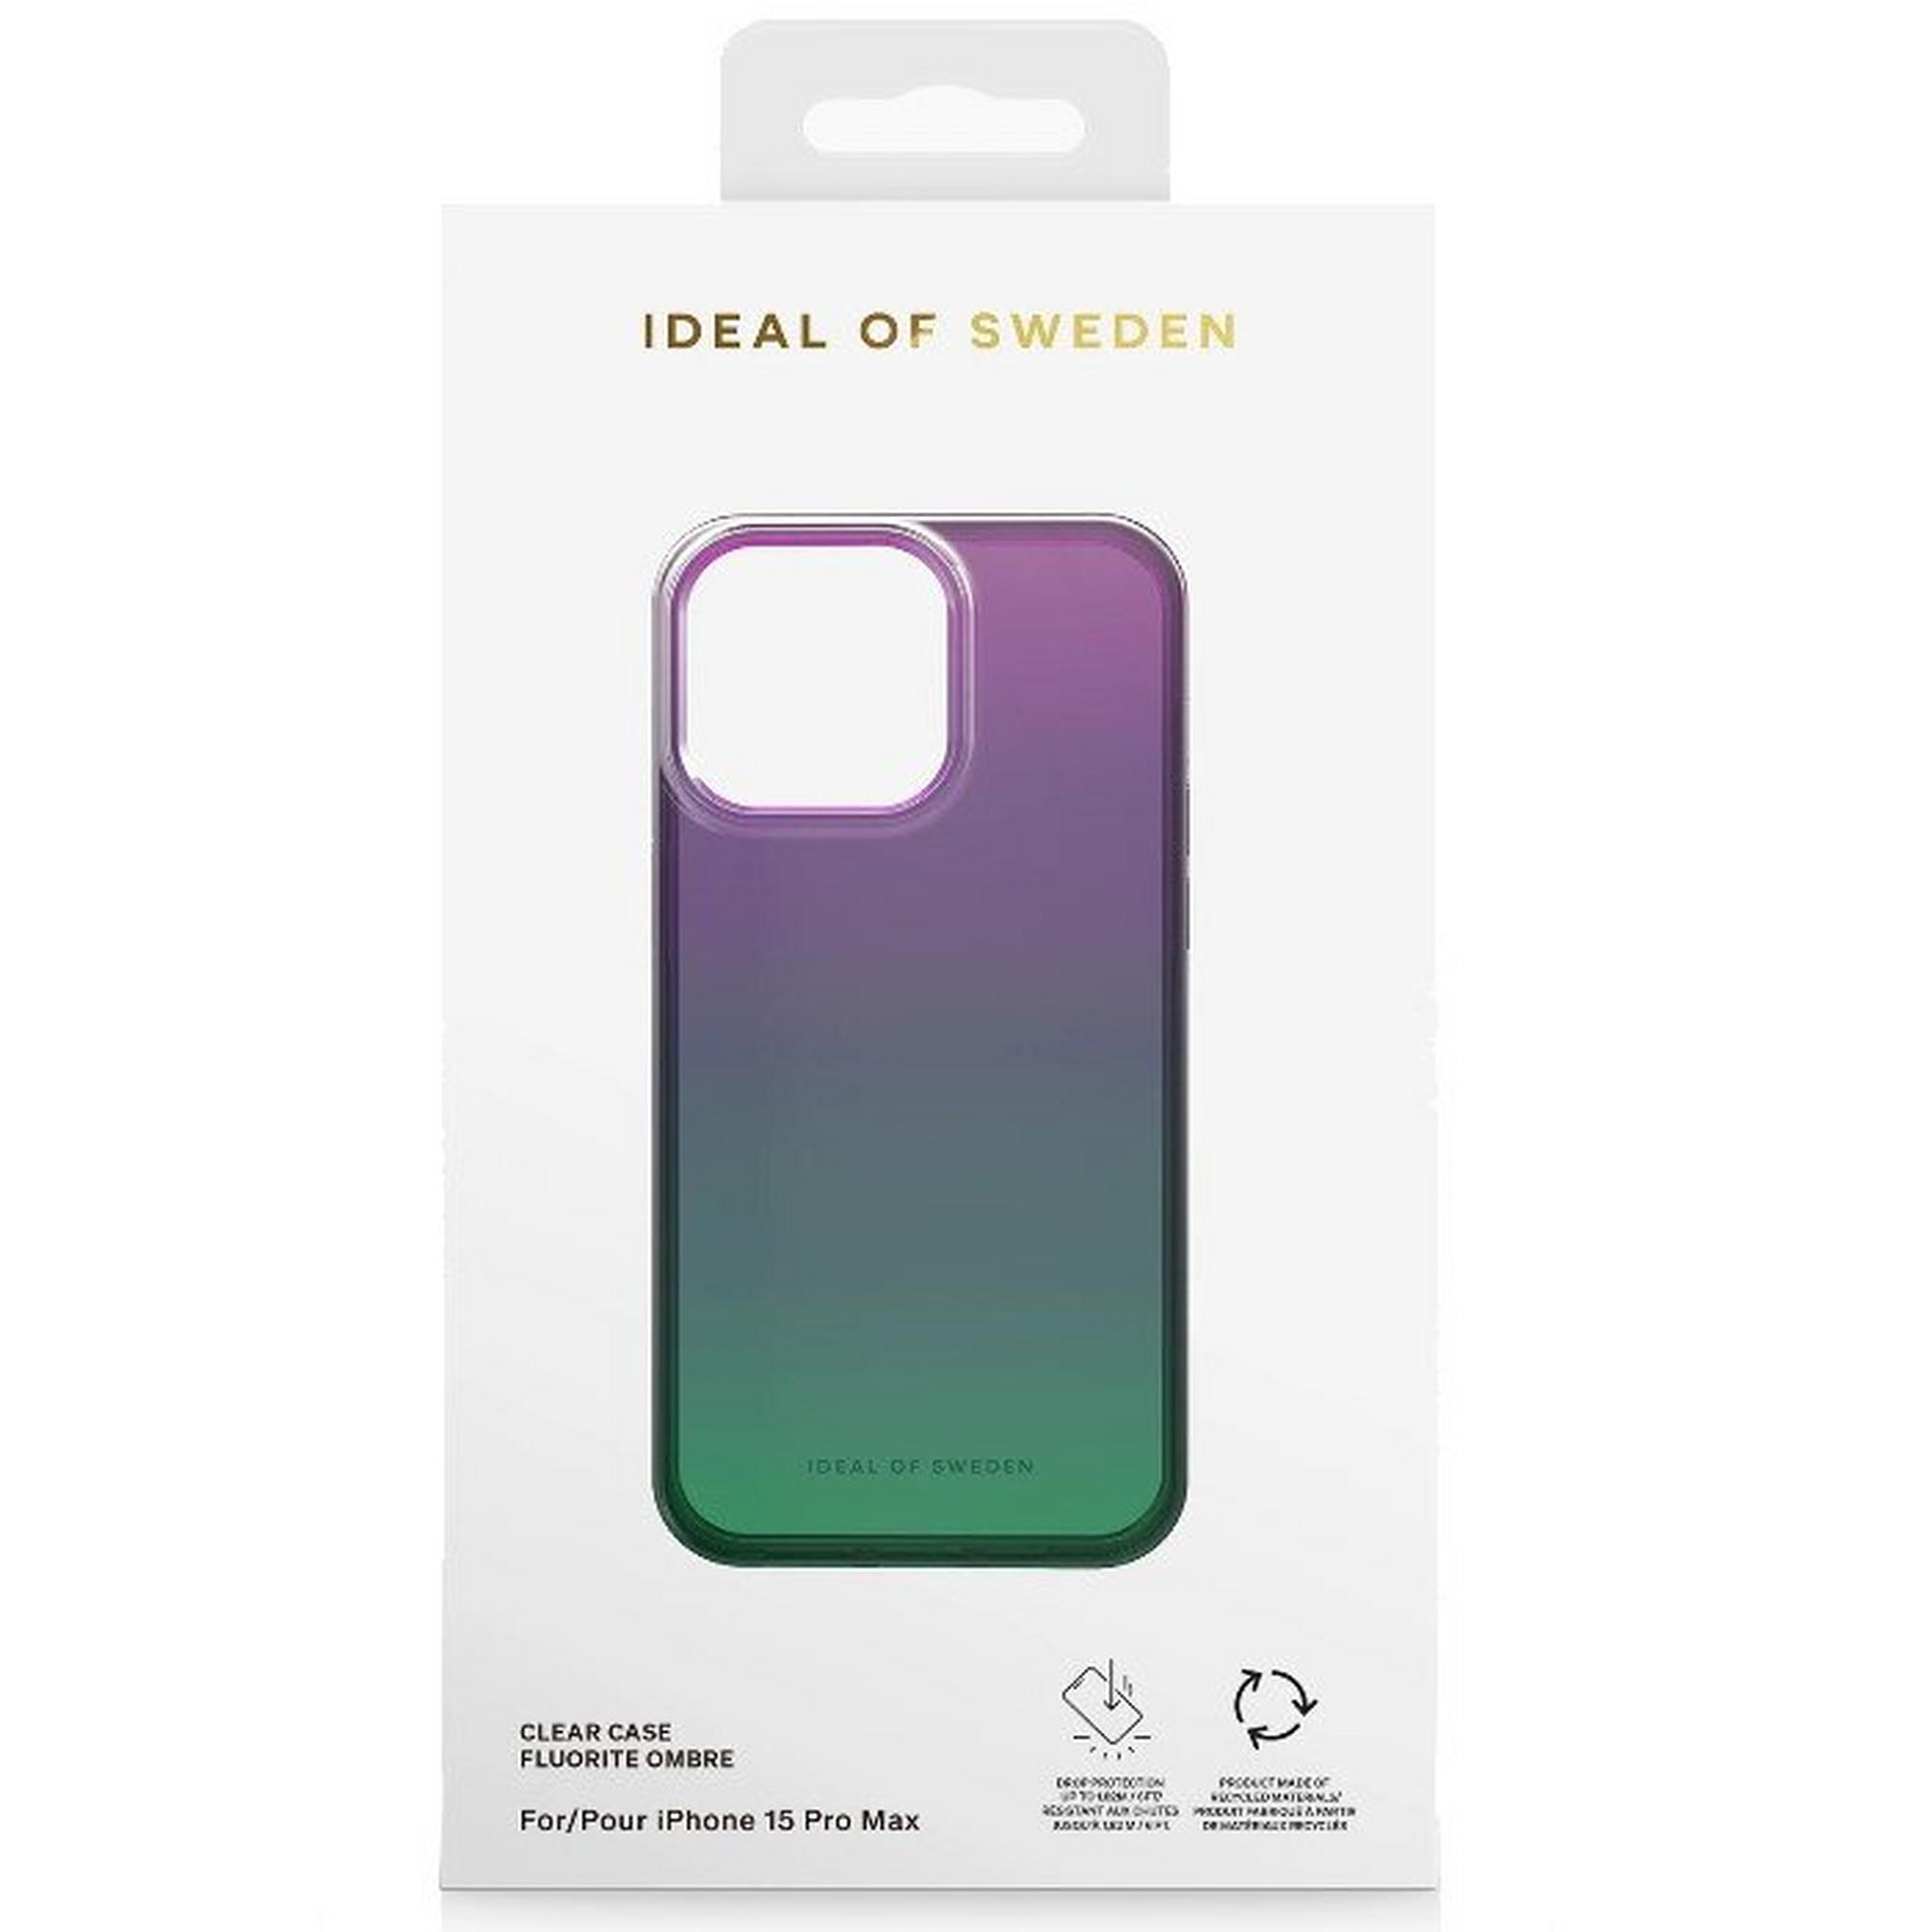 Ideal of Sweden Case for iPhone 15 Pro Max – Fluorite Ombre